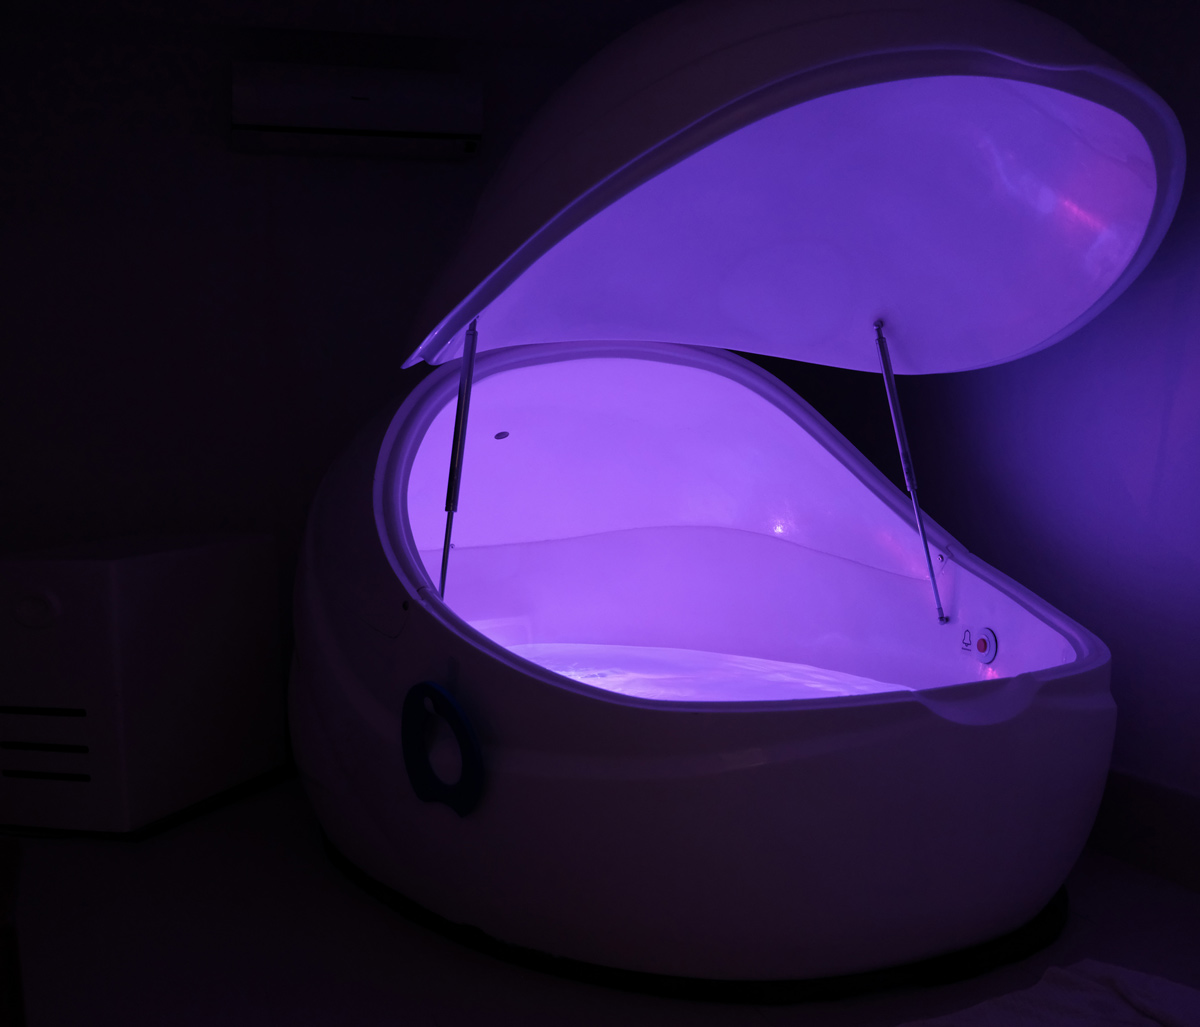 What is a sensory deprivation tank? And why are people taking psychedelics in them?